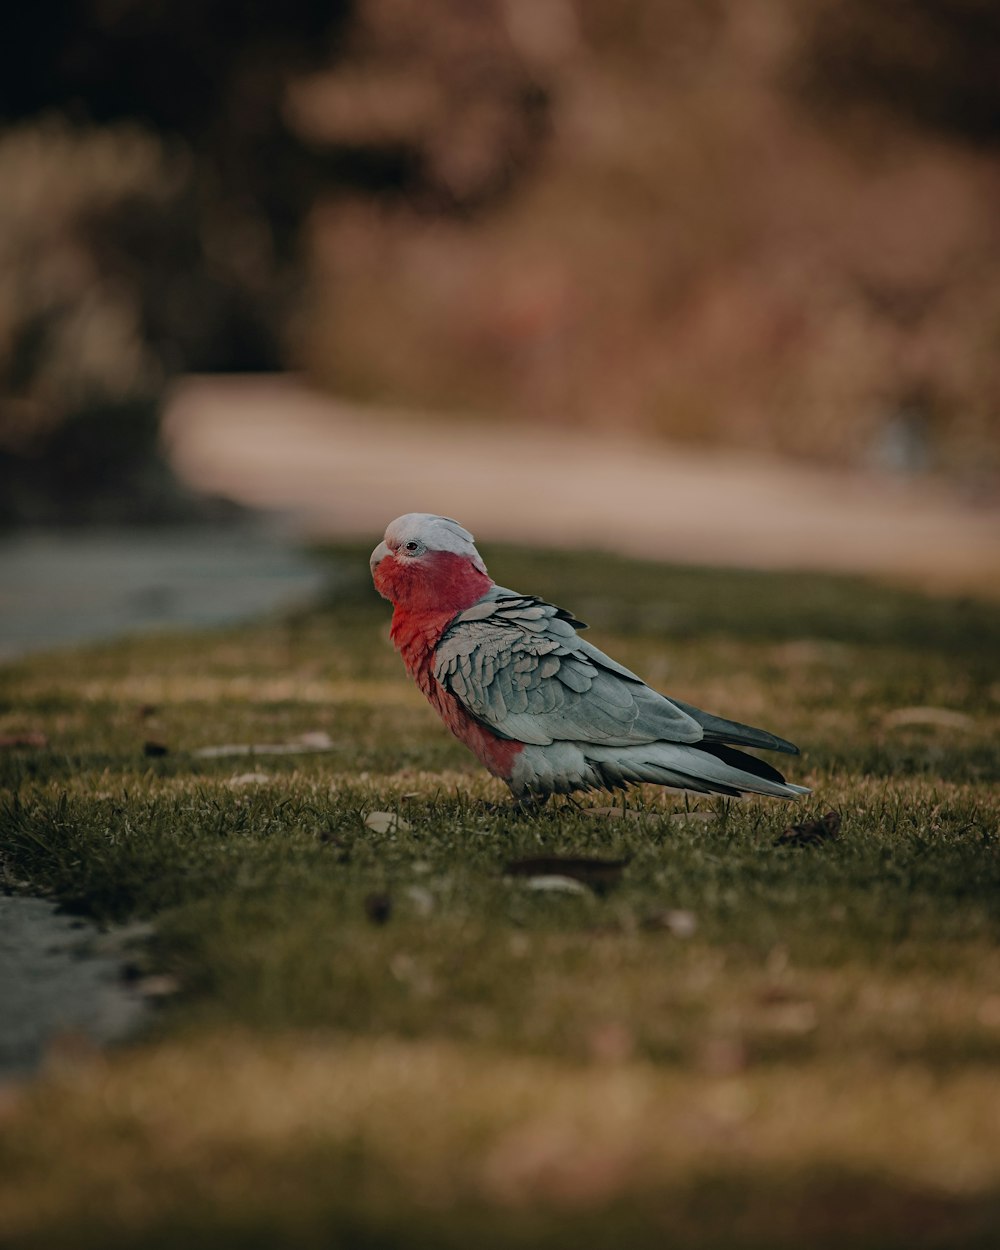 red and gray bird on green grass during daytime